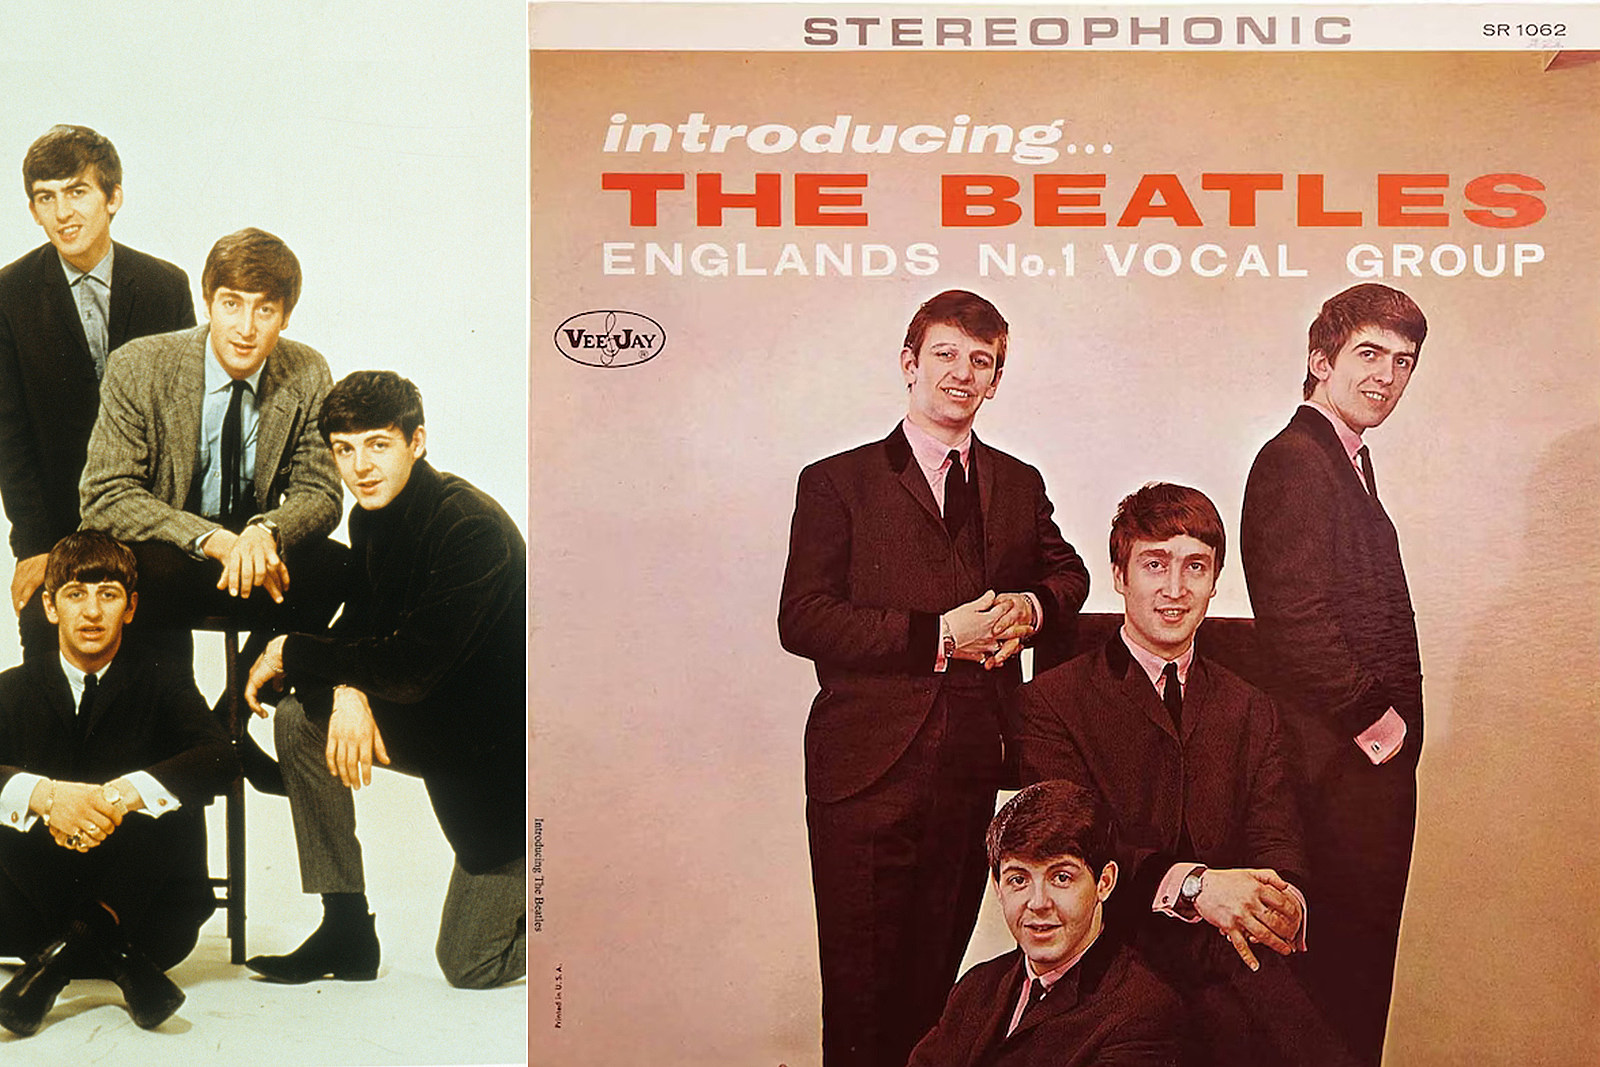 Yesterday movie gets Beatles' seal of approval